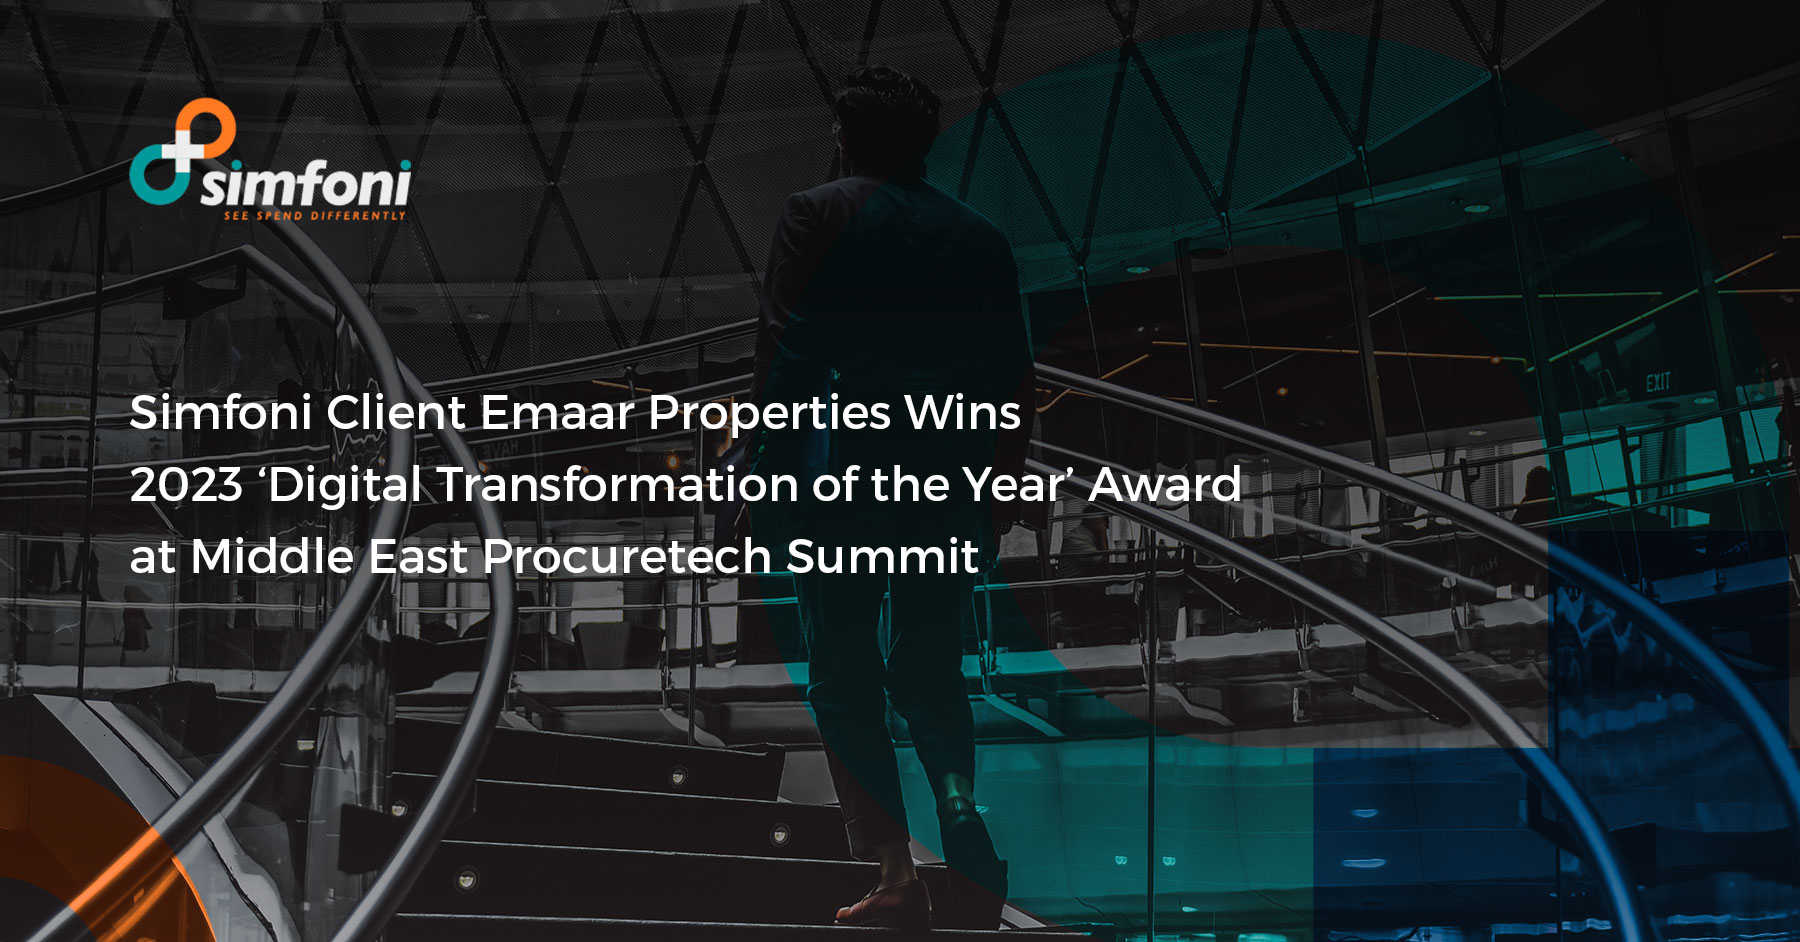 Simfoni Client Emaar Properties Wins 2023 ‘Digital Transformation of the Year’ Award at Middle East Procuretech Summit